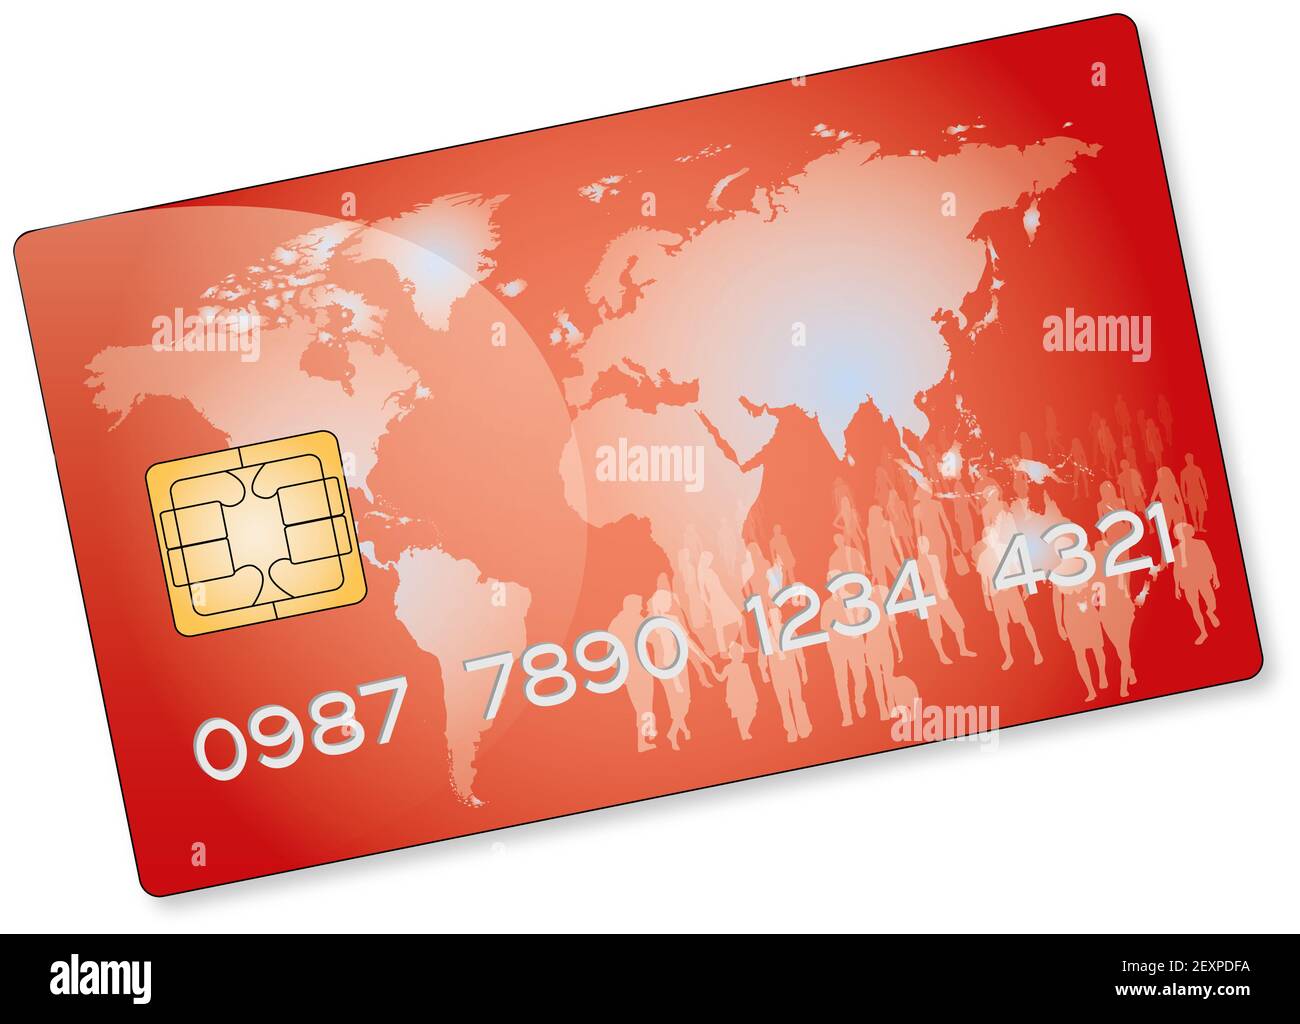 Red credit card Stock Photo